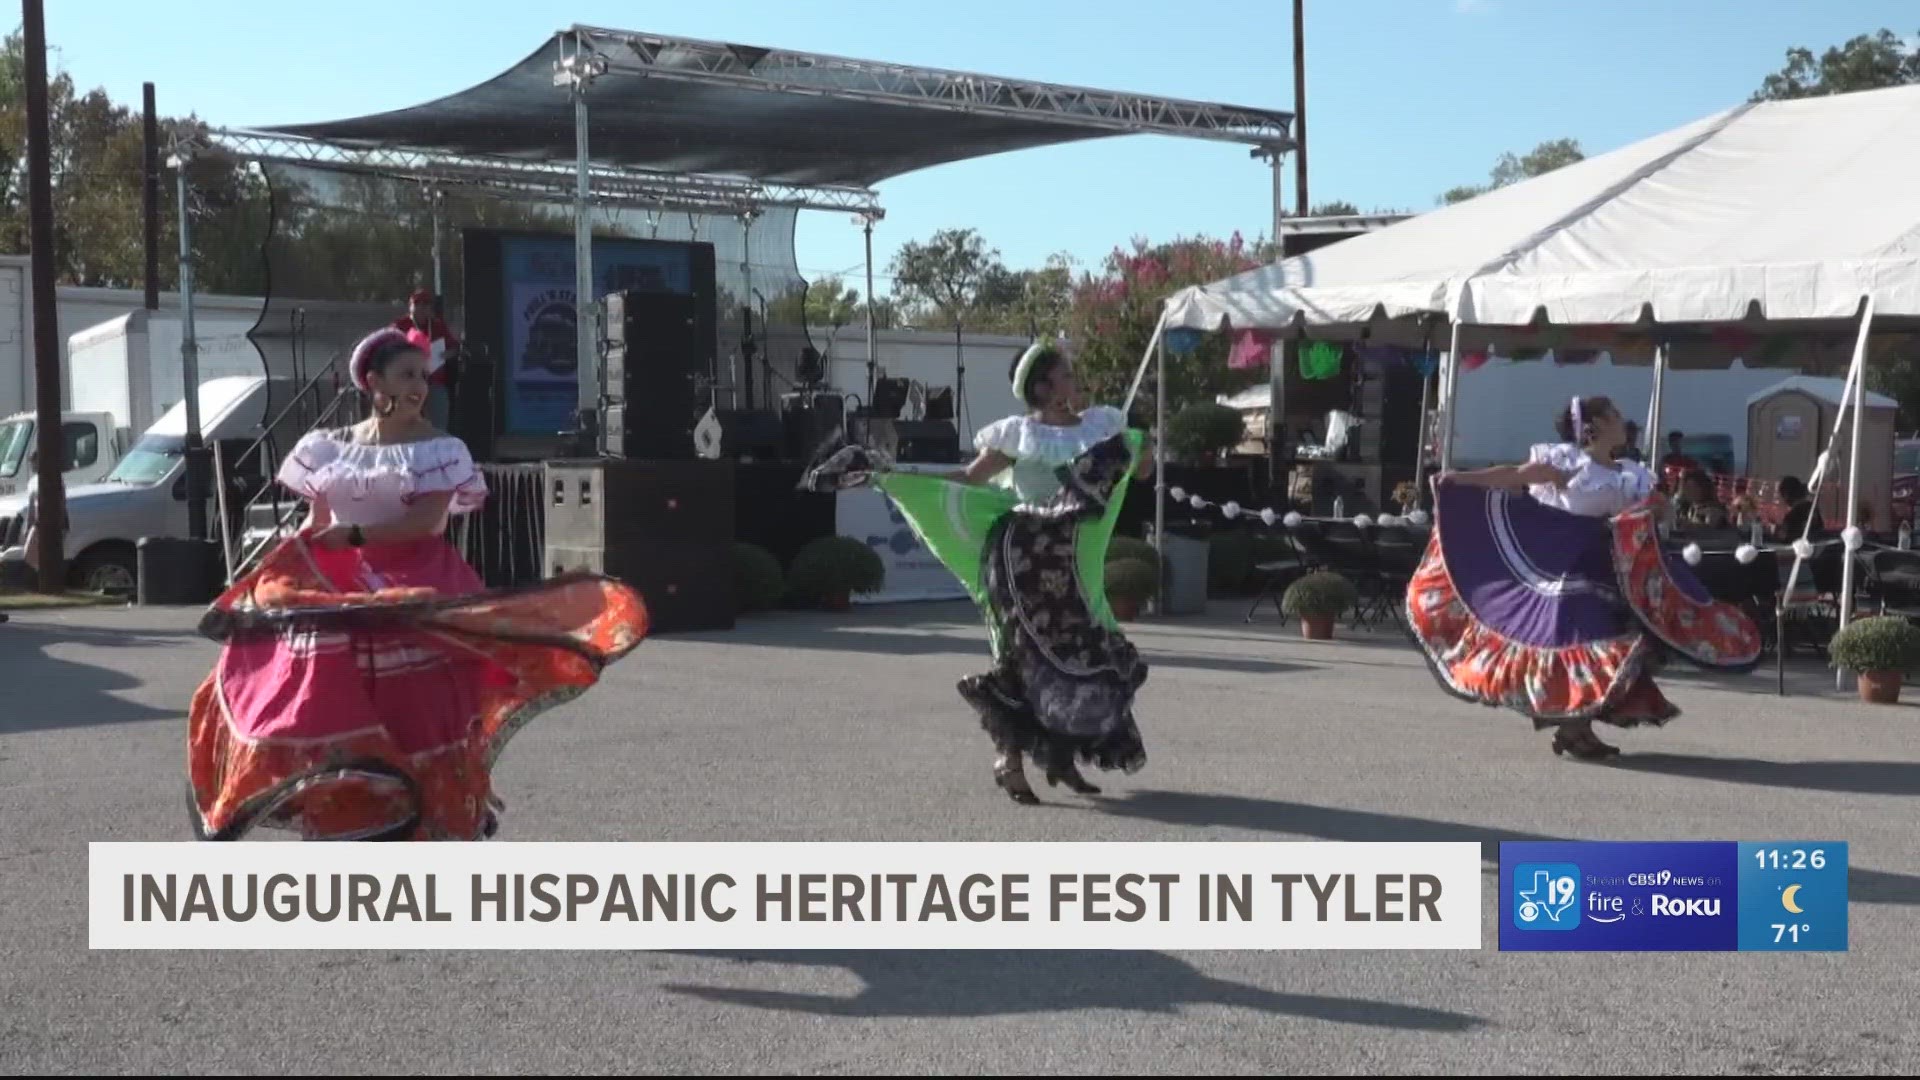 The Phoenix Enterprises ETX and the Hand UP Network brought the sounds and taste of Hispanic culture to Tyler.